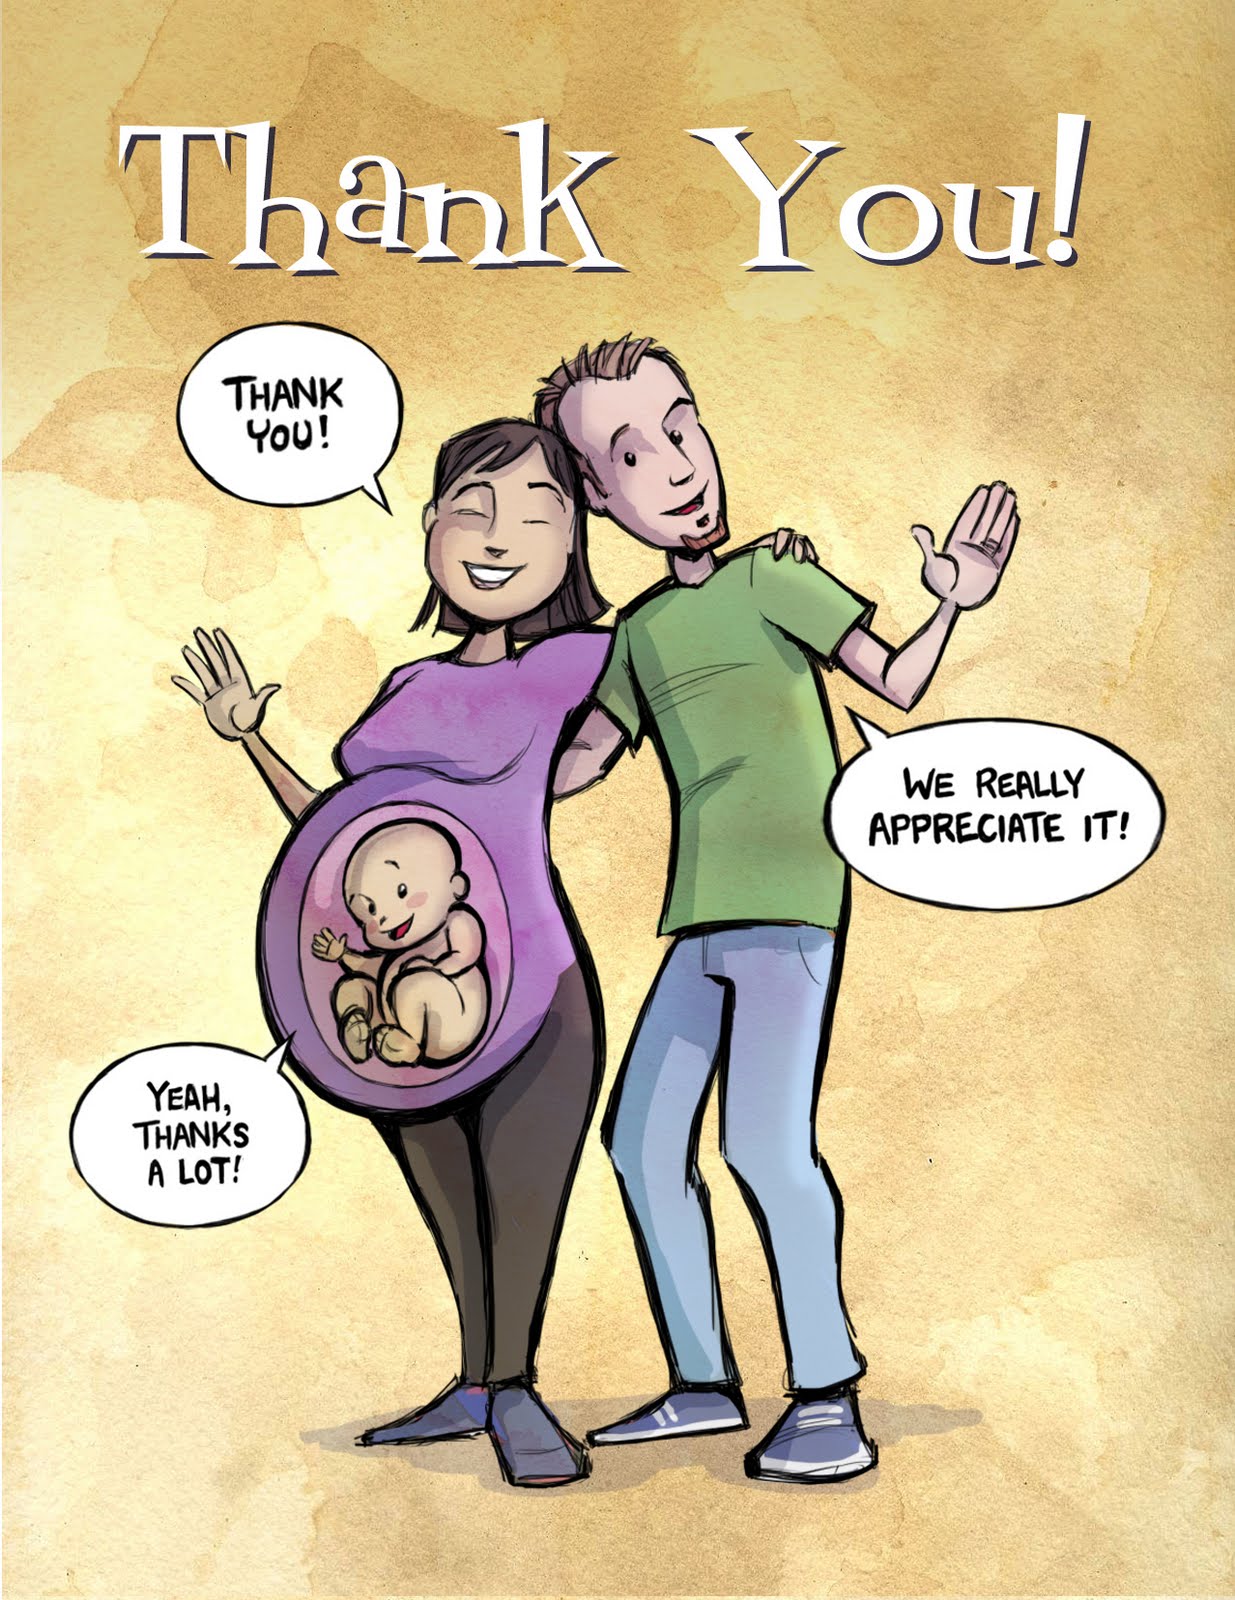 art-of-joshua-armstrong-baby-shower-thank-you-card